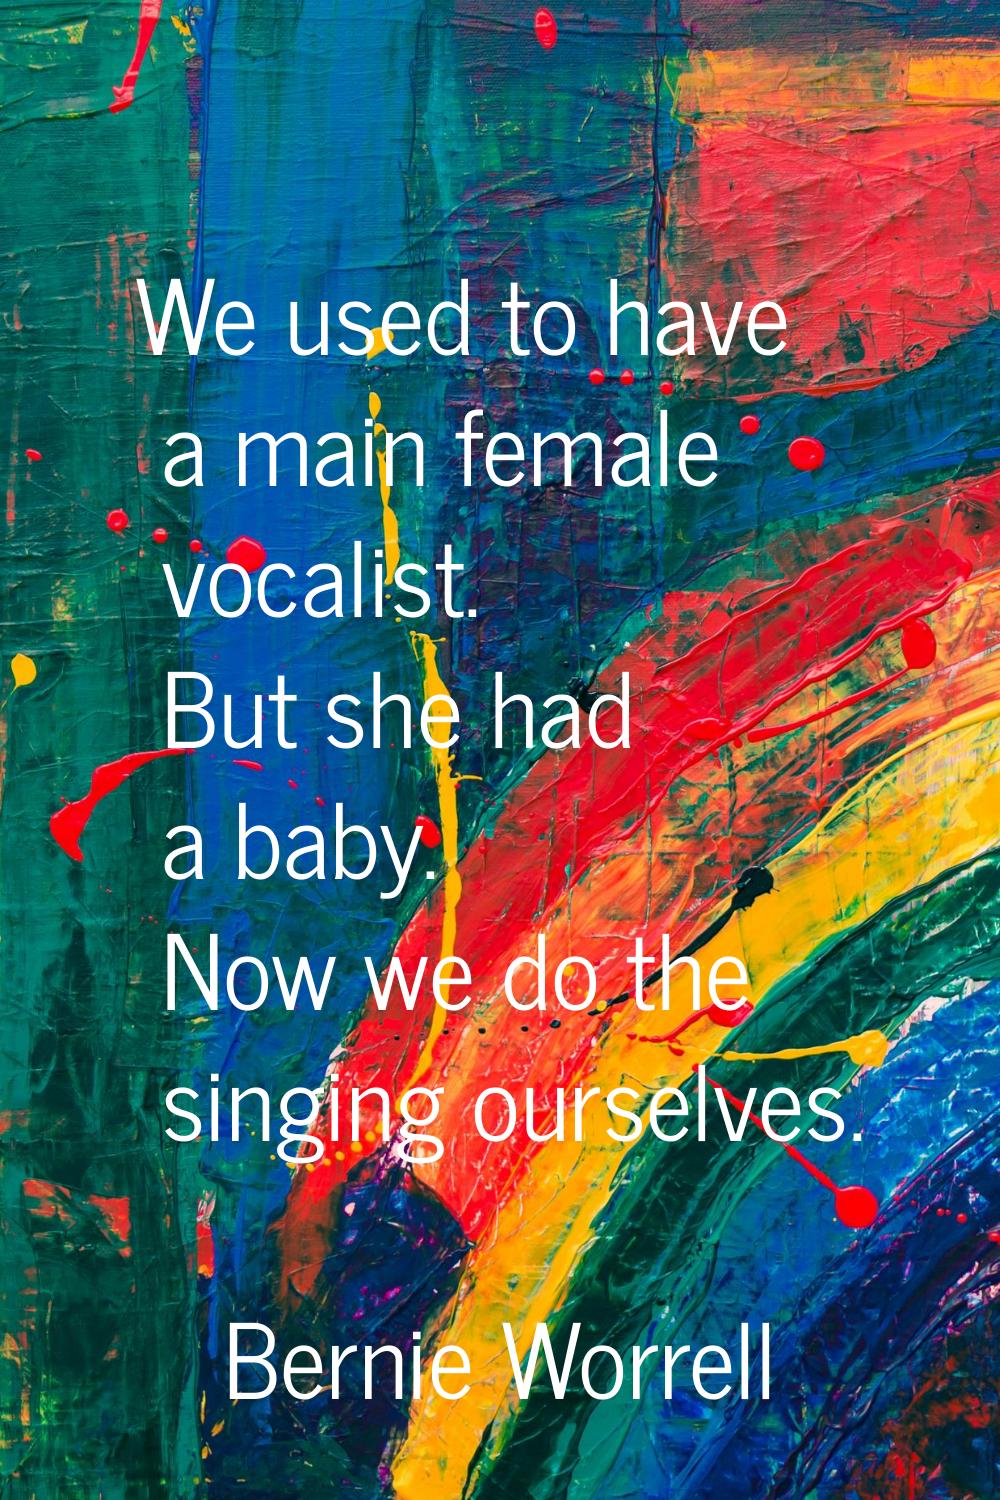 We used to have a main female vocalist. But she had a baby. Now we do the singing ourselves.